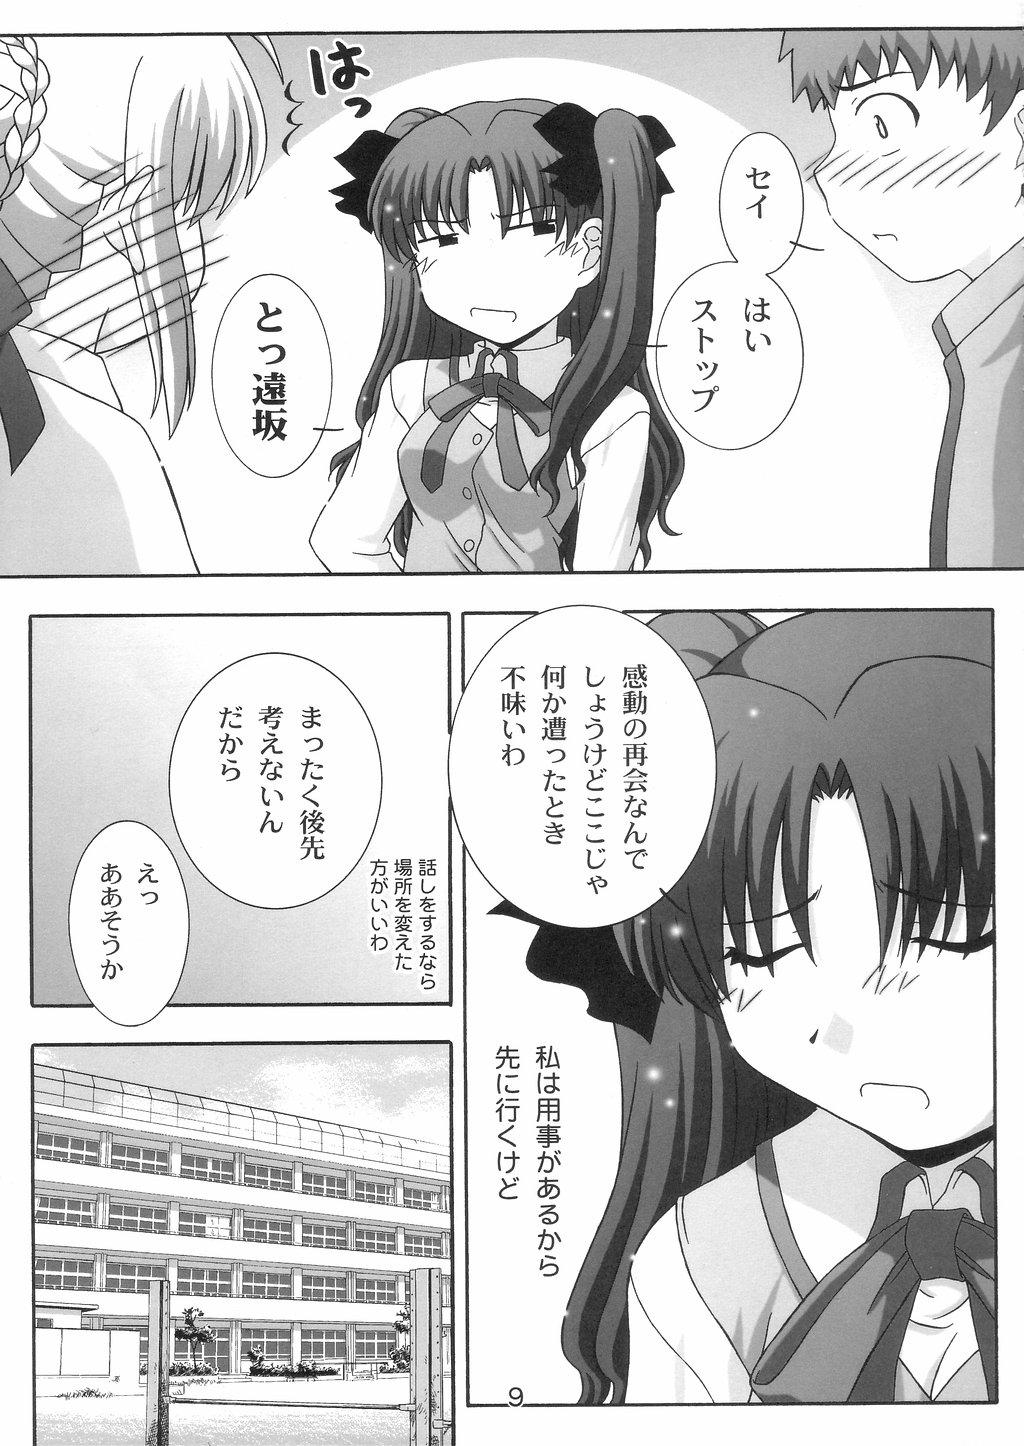 Free Hardcore Porn Secret file next 10 - I feel my Fate - Fate stay night  - Page 8